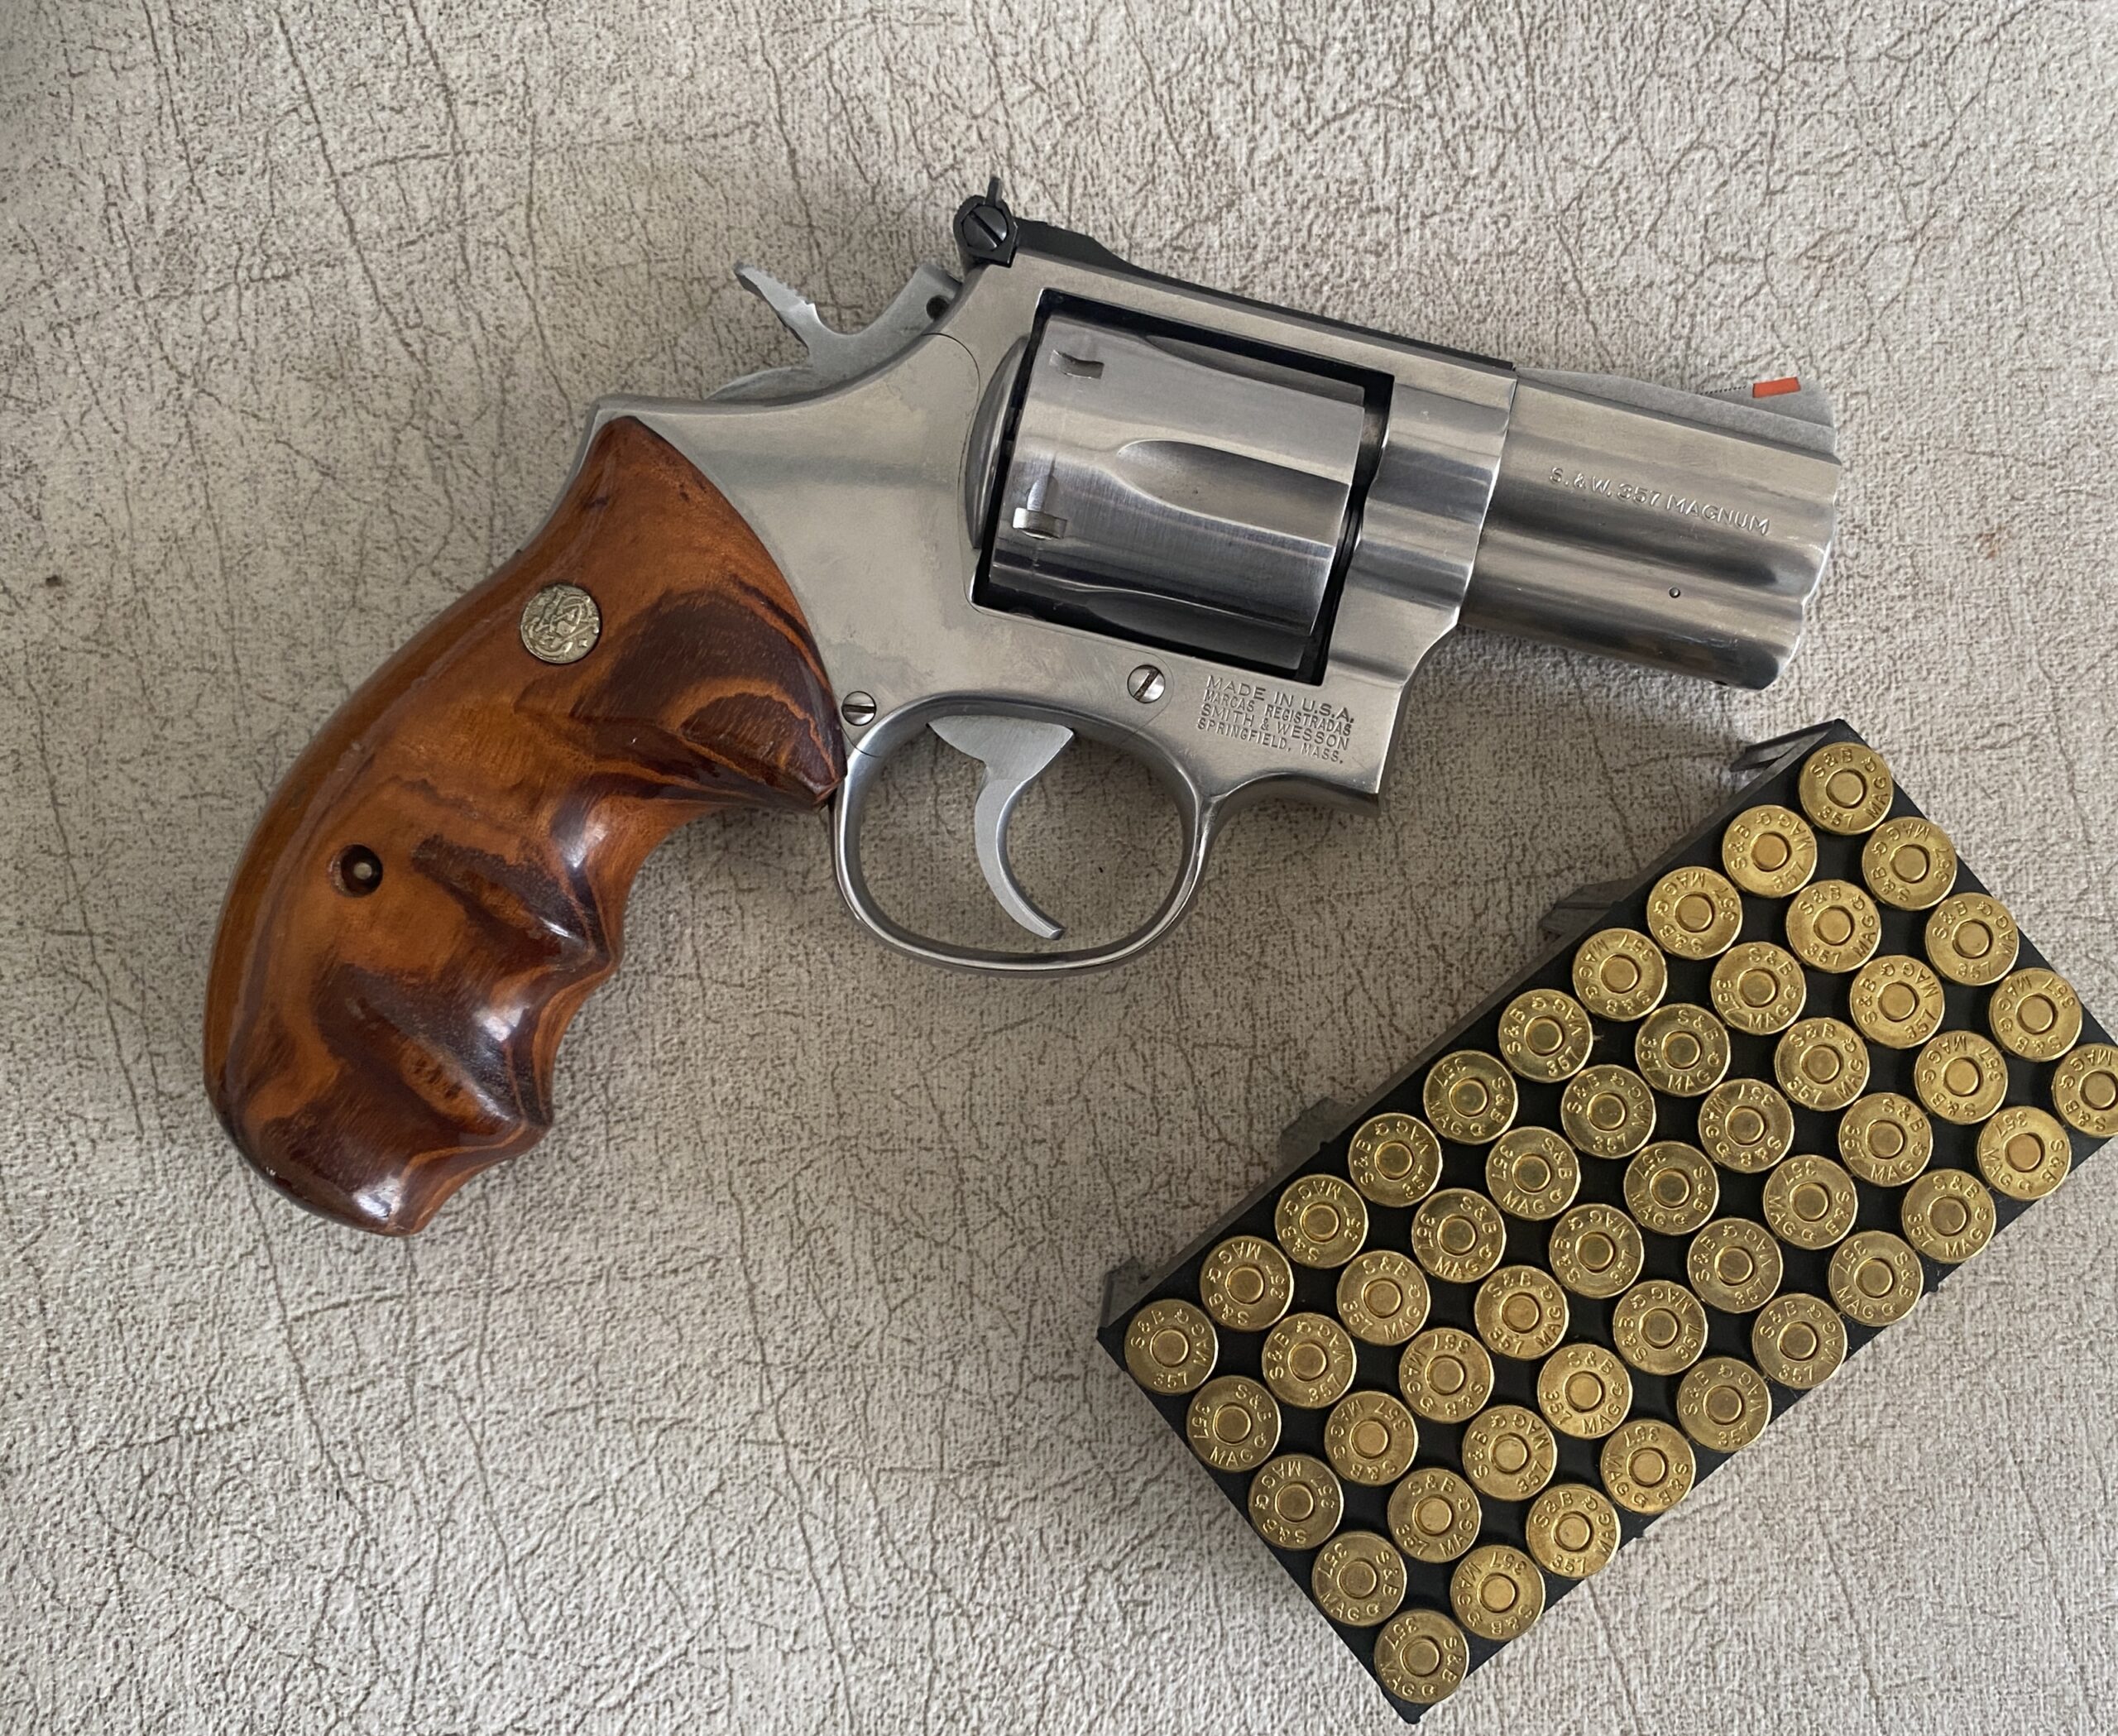 Smith & wesson 357 magnum